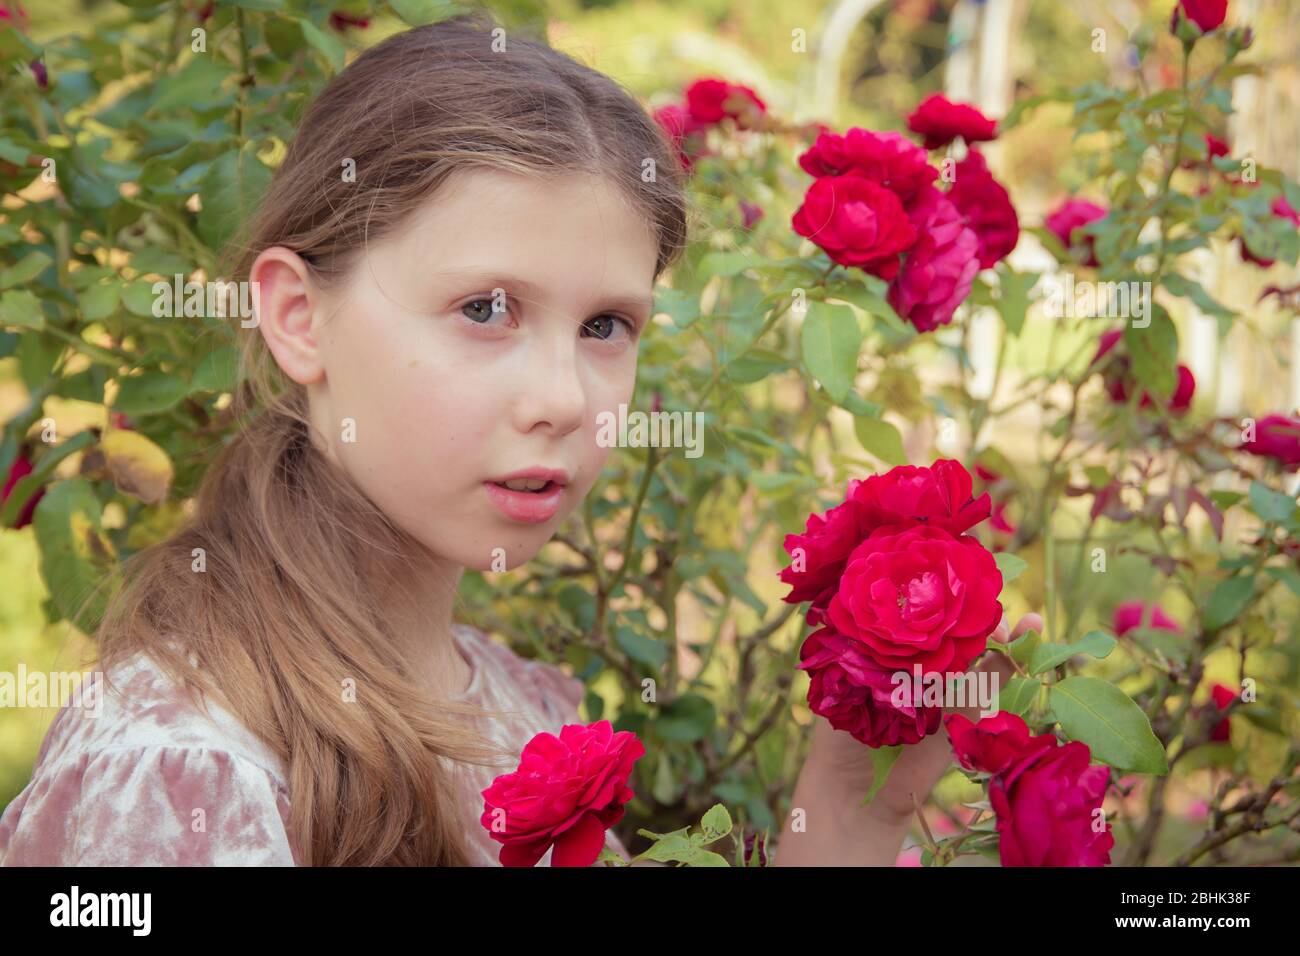 A fresh-faced portrait of a pretty girl holding roses in a summer garden Stock Photo